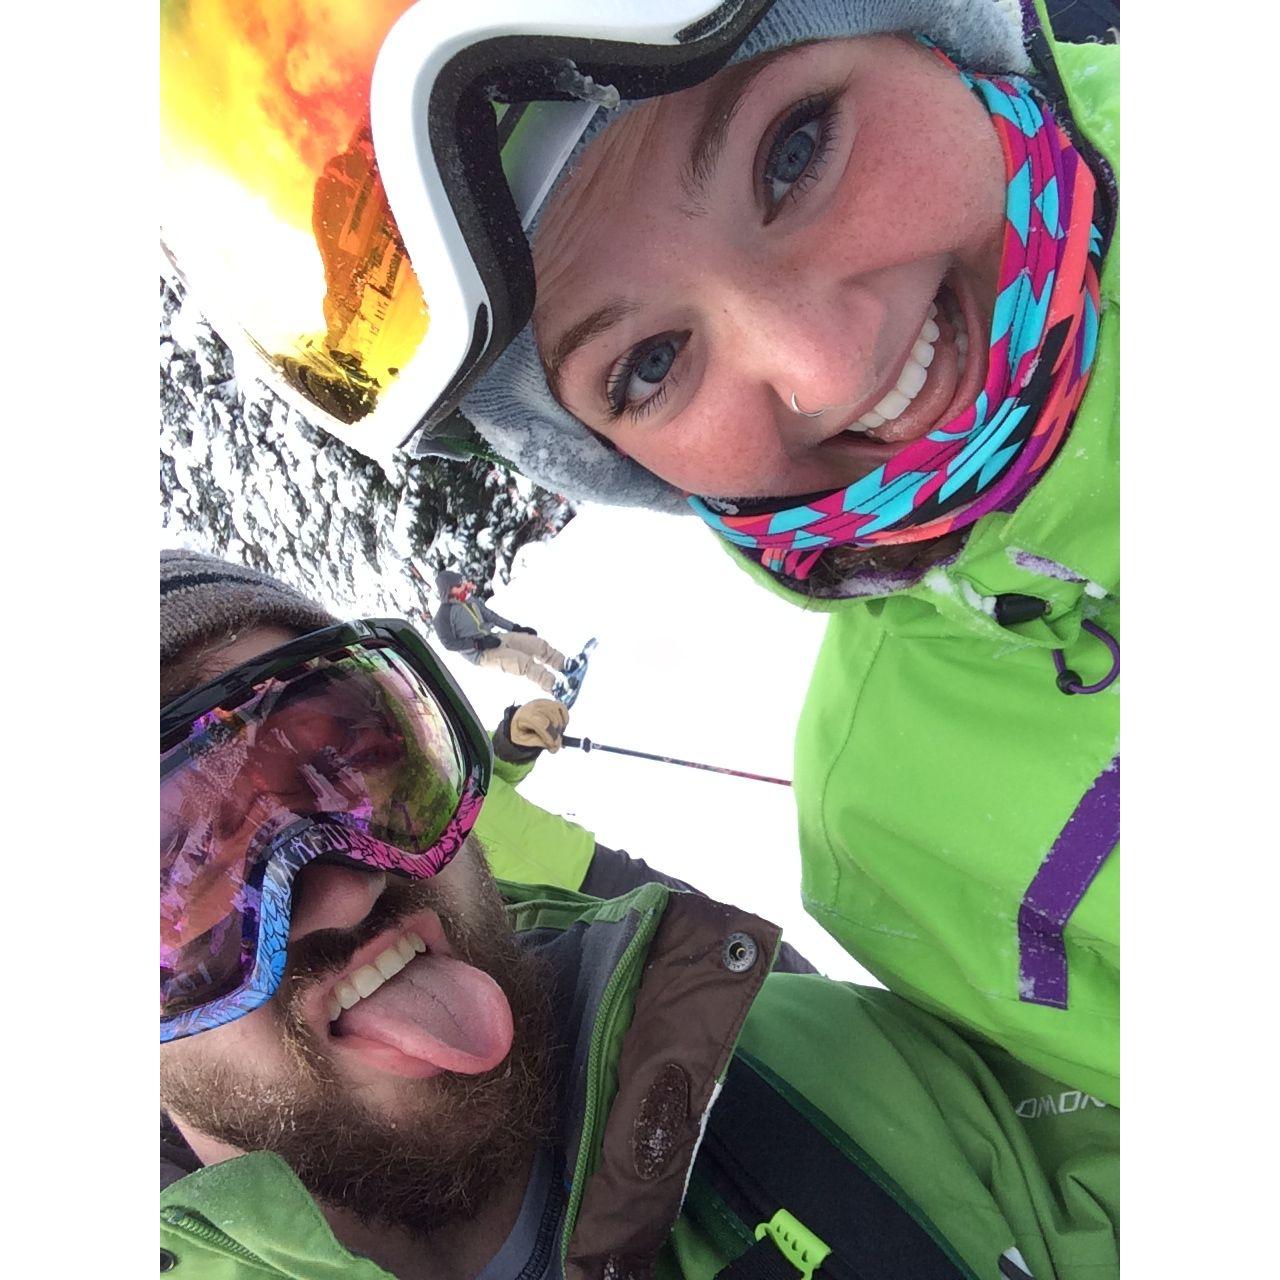 Our first photo together & first day skiing at Stevens Pass, December 2014